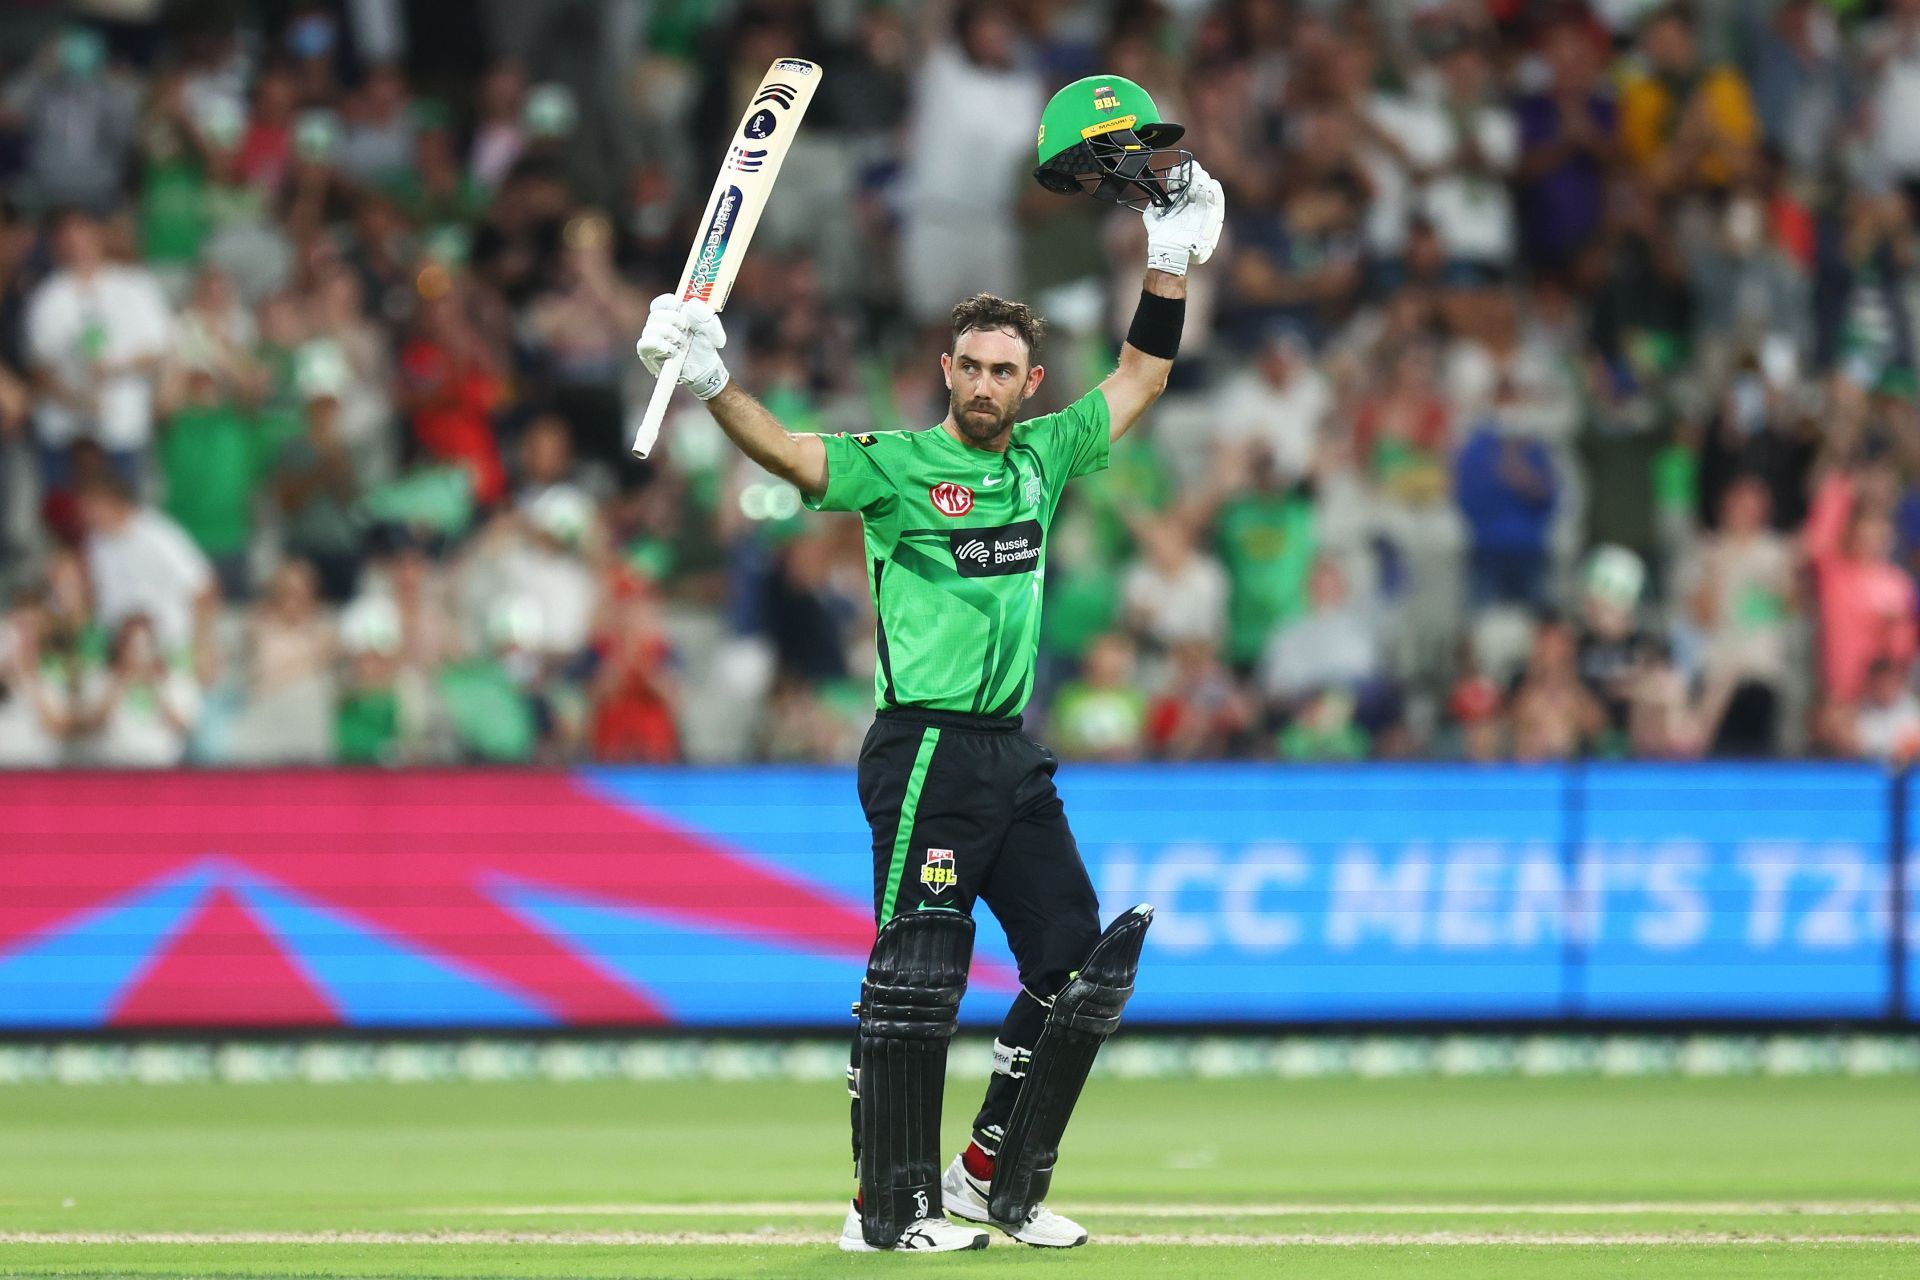 Glenn Maxwell whacked 22 fours and four sixes in his knock